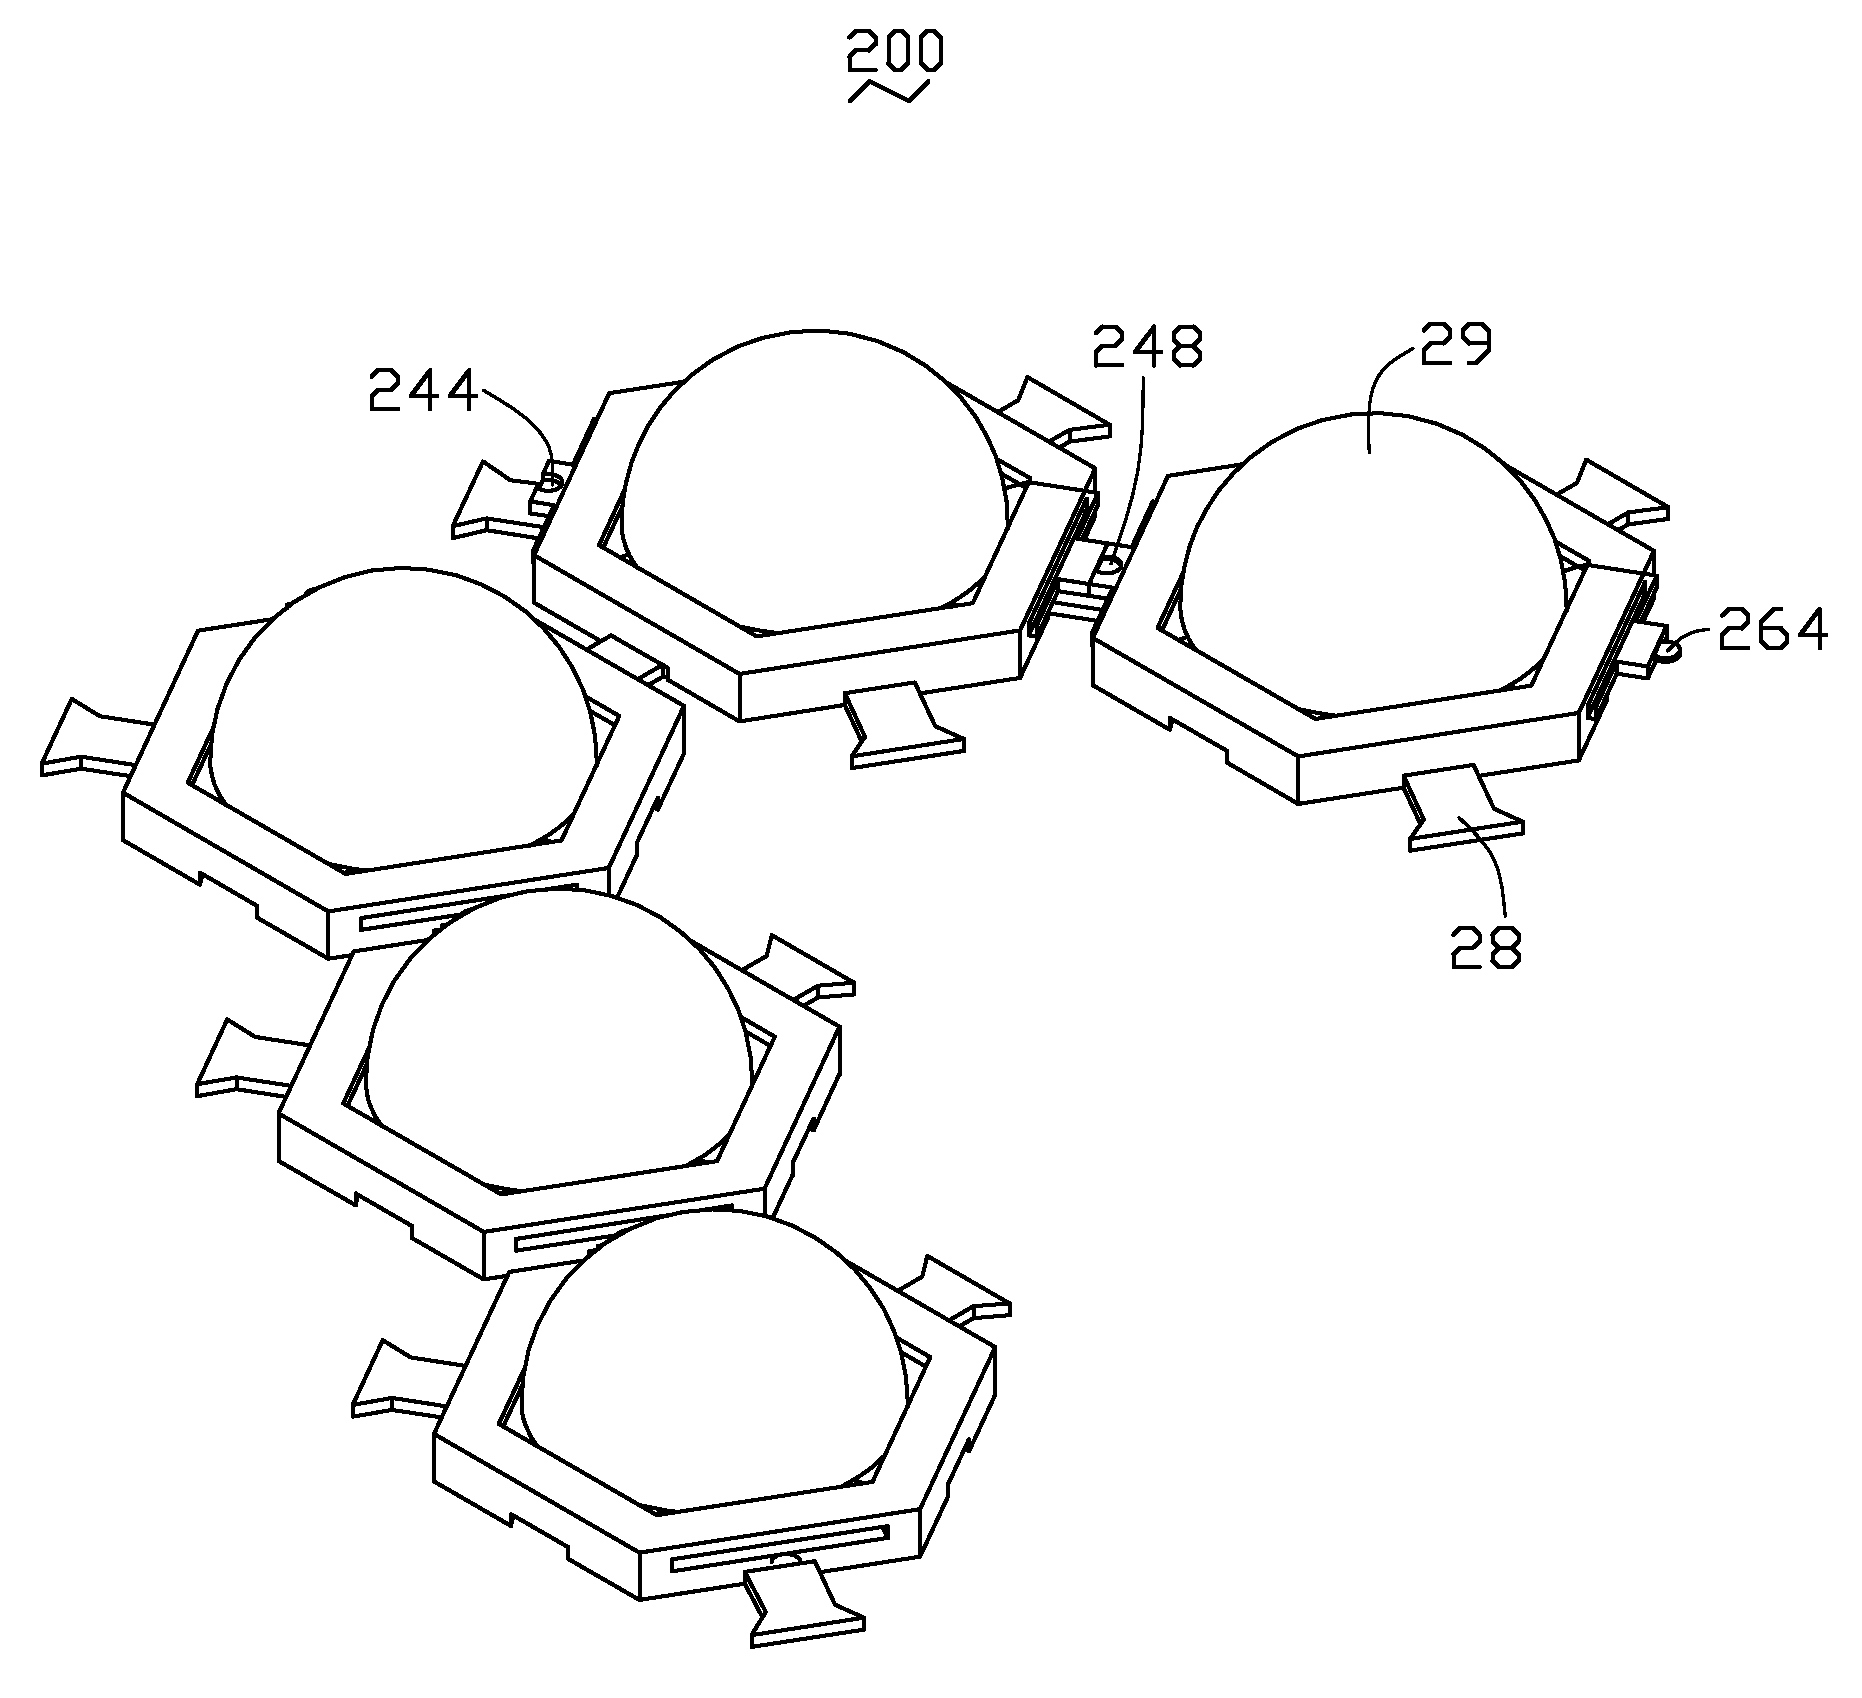 LED assembly with separated thermal and electrical structures thereof